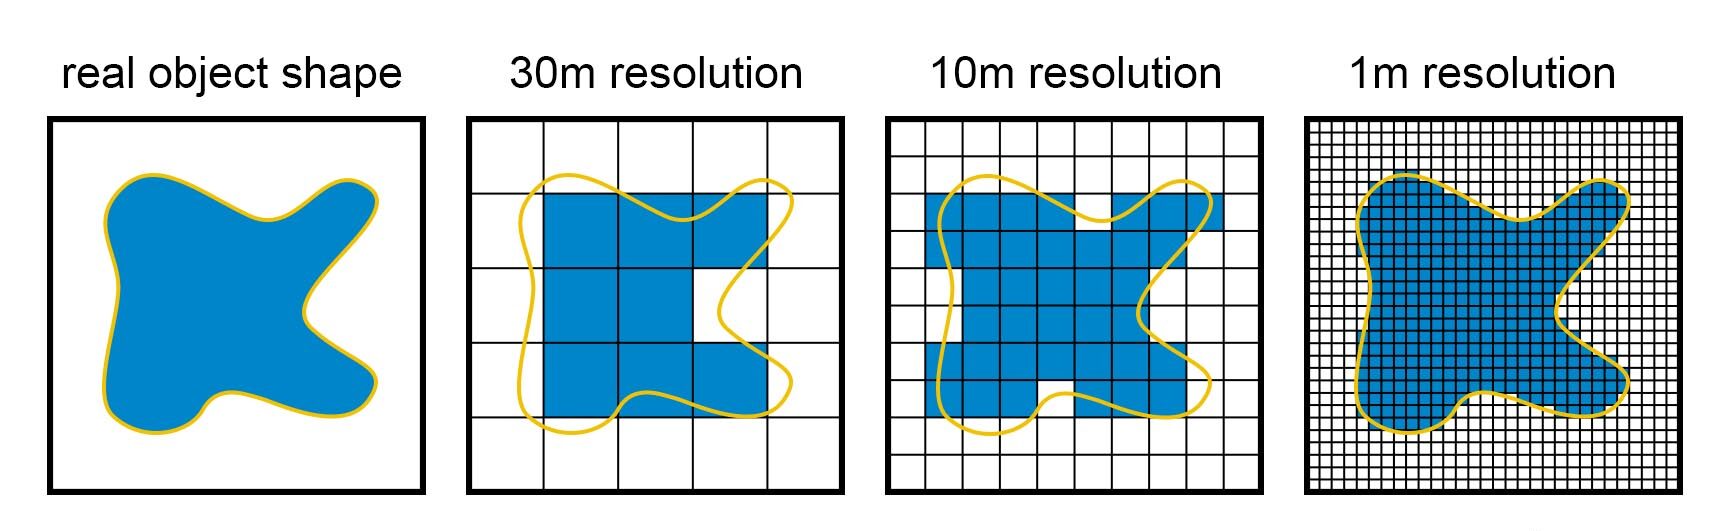 Diagram of satellite image resolutions comparing real object shape to 30m, 10m, and 1m resolution images. The diagram explains that as the resolution of a satellite image increases the image will more accurately represent the true shape of an object.